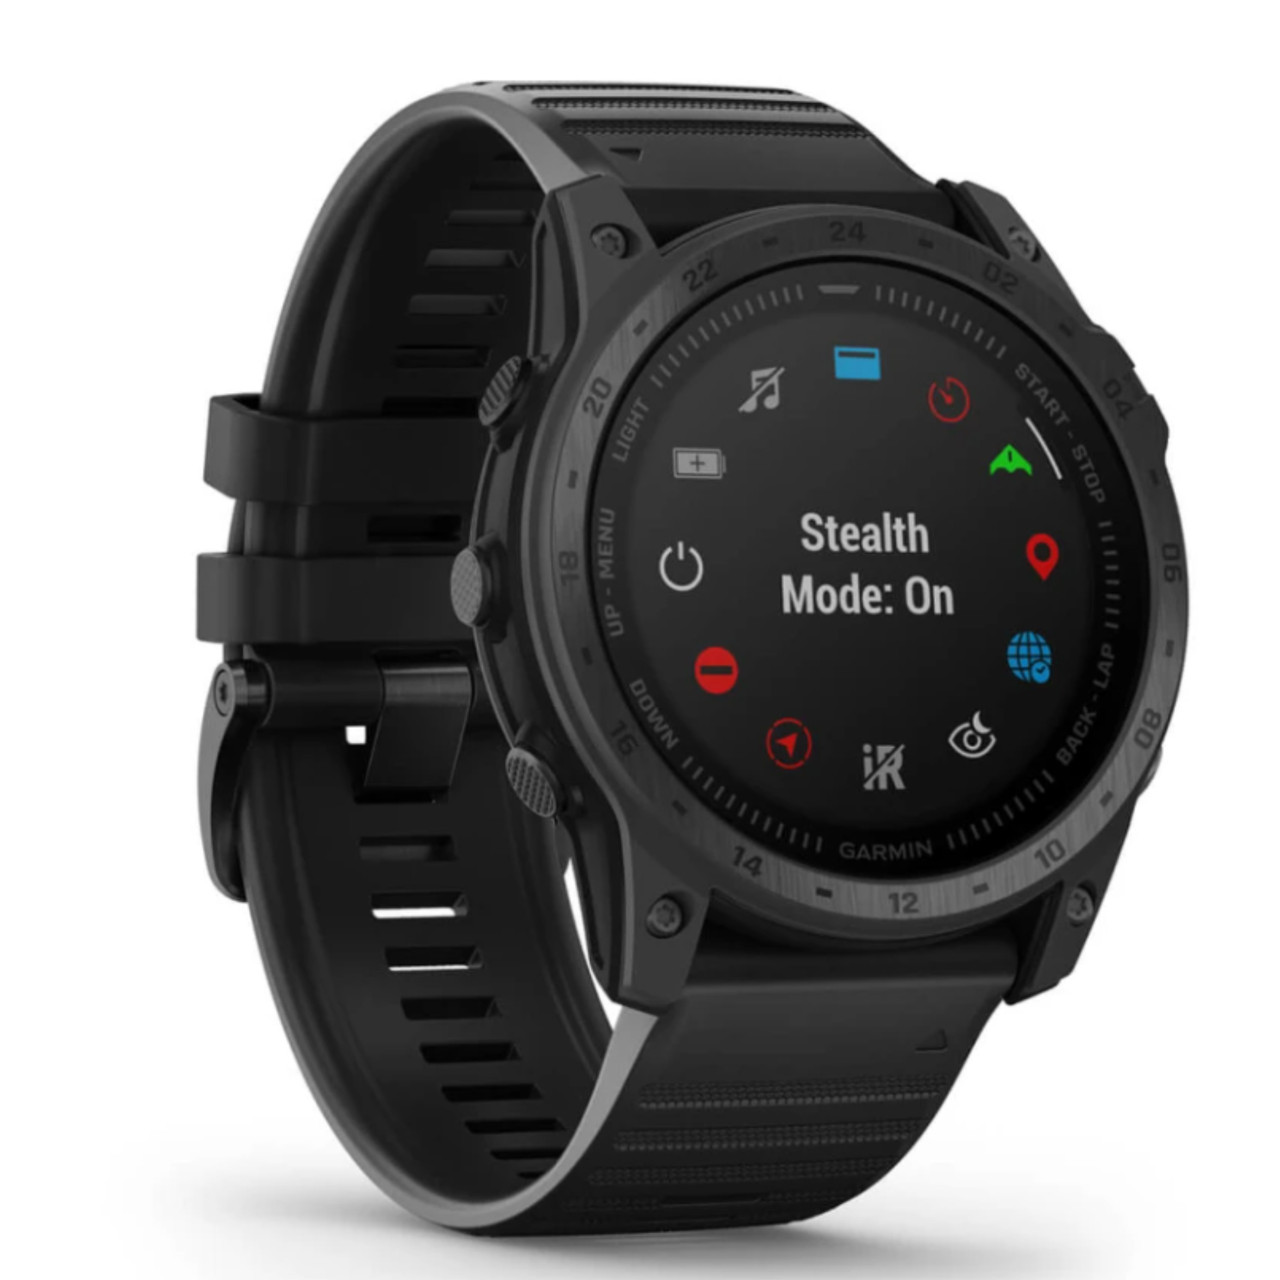 Garmin New OEM tactix® 7 – Standard Edition Premium Tactical GPS Watch with Silicone Band, 010-02704-00